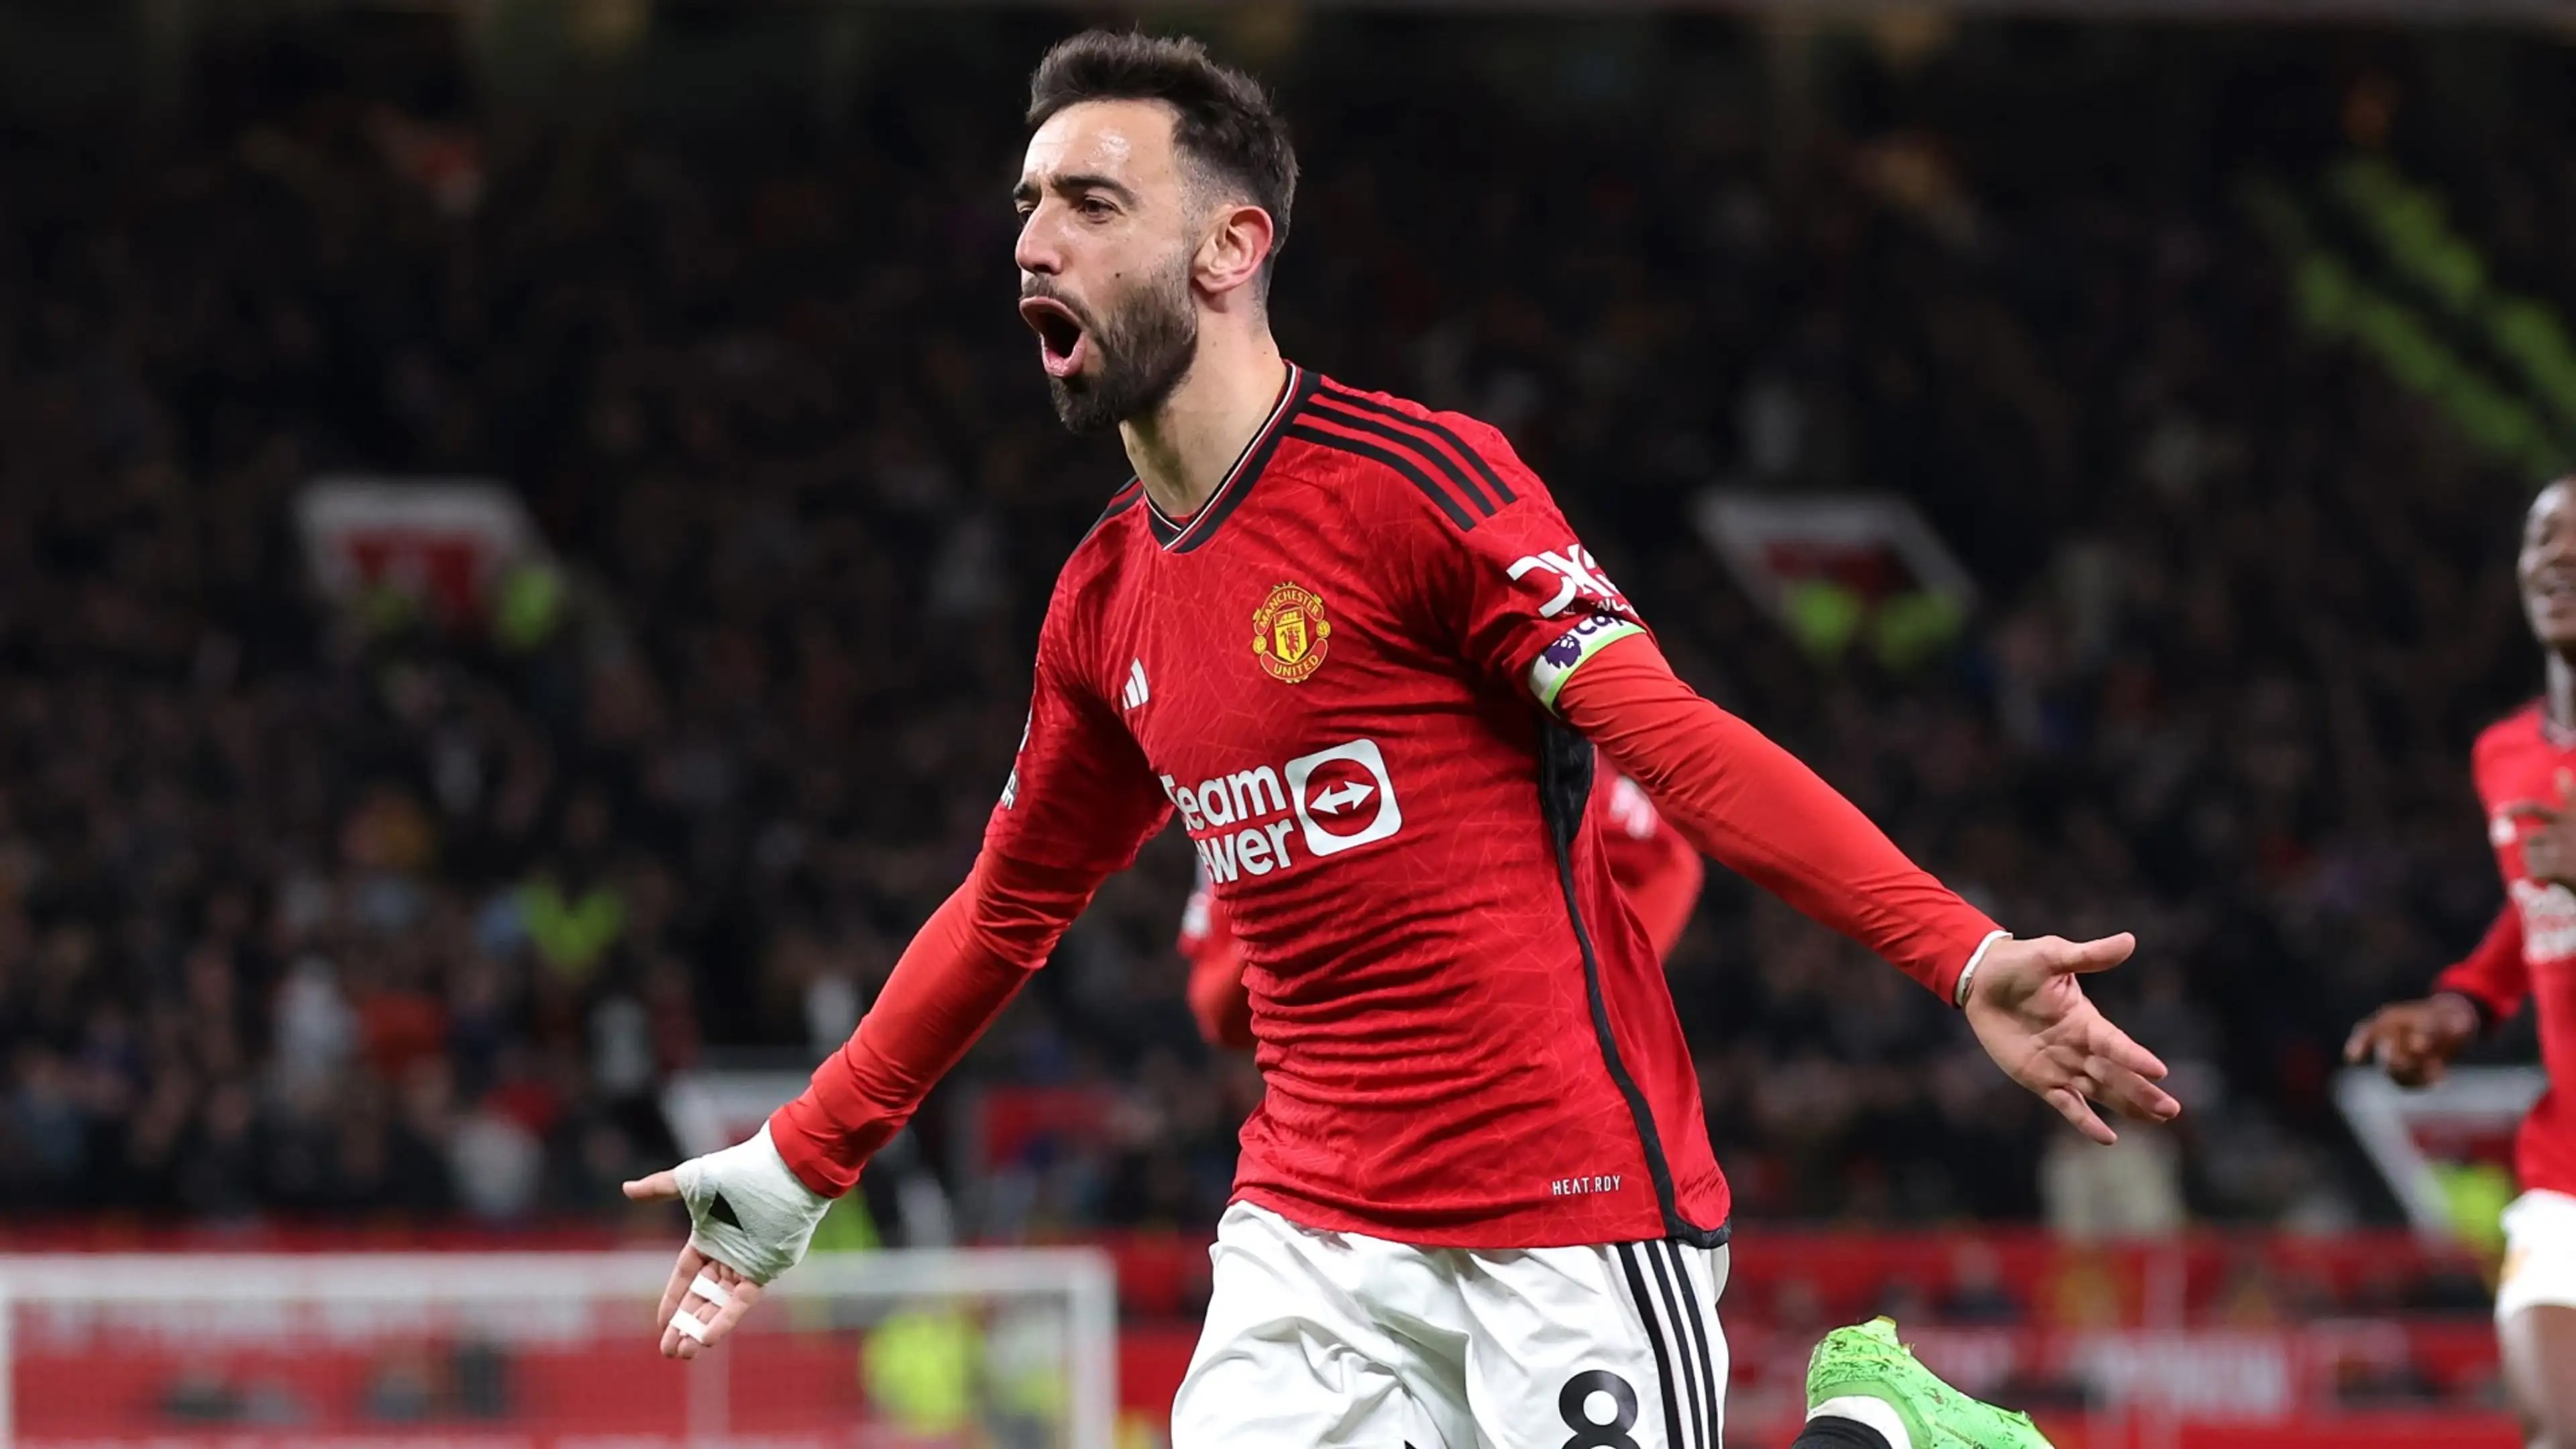 Manchester United legend Roy Keane sounds off on Bruno Fernandes during heated argument with Ian Wright.